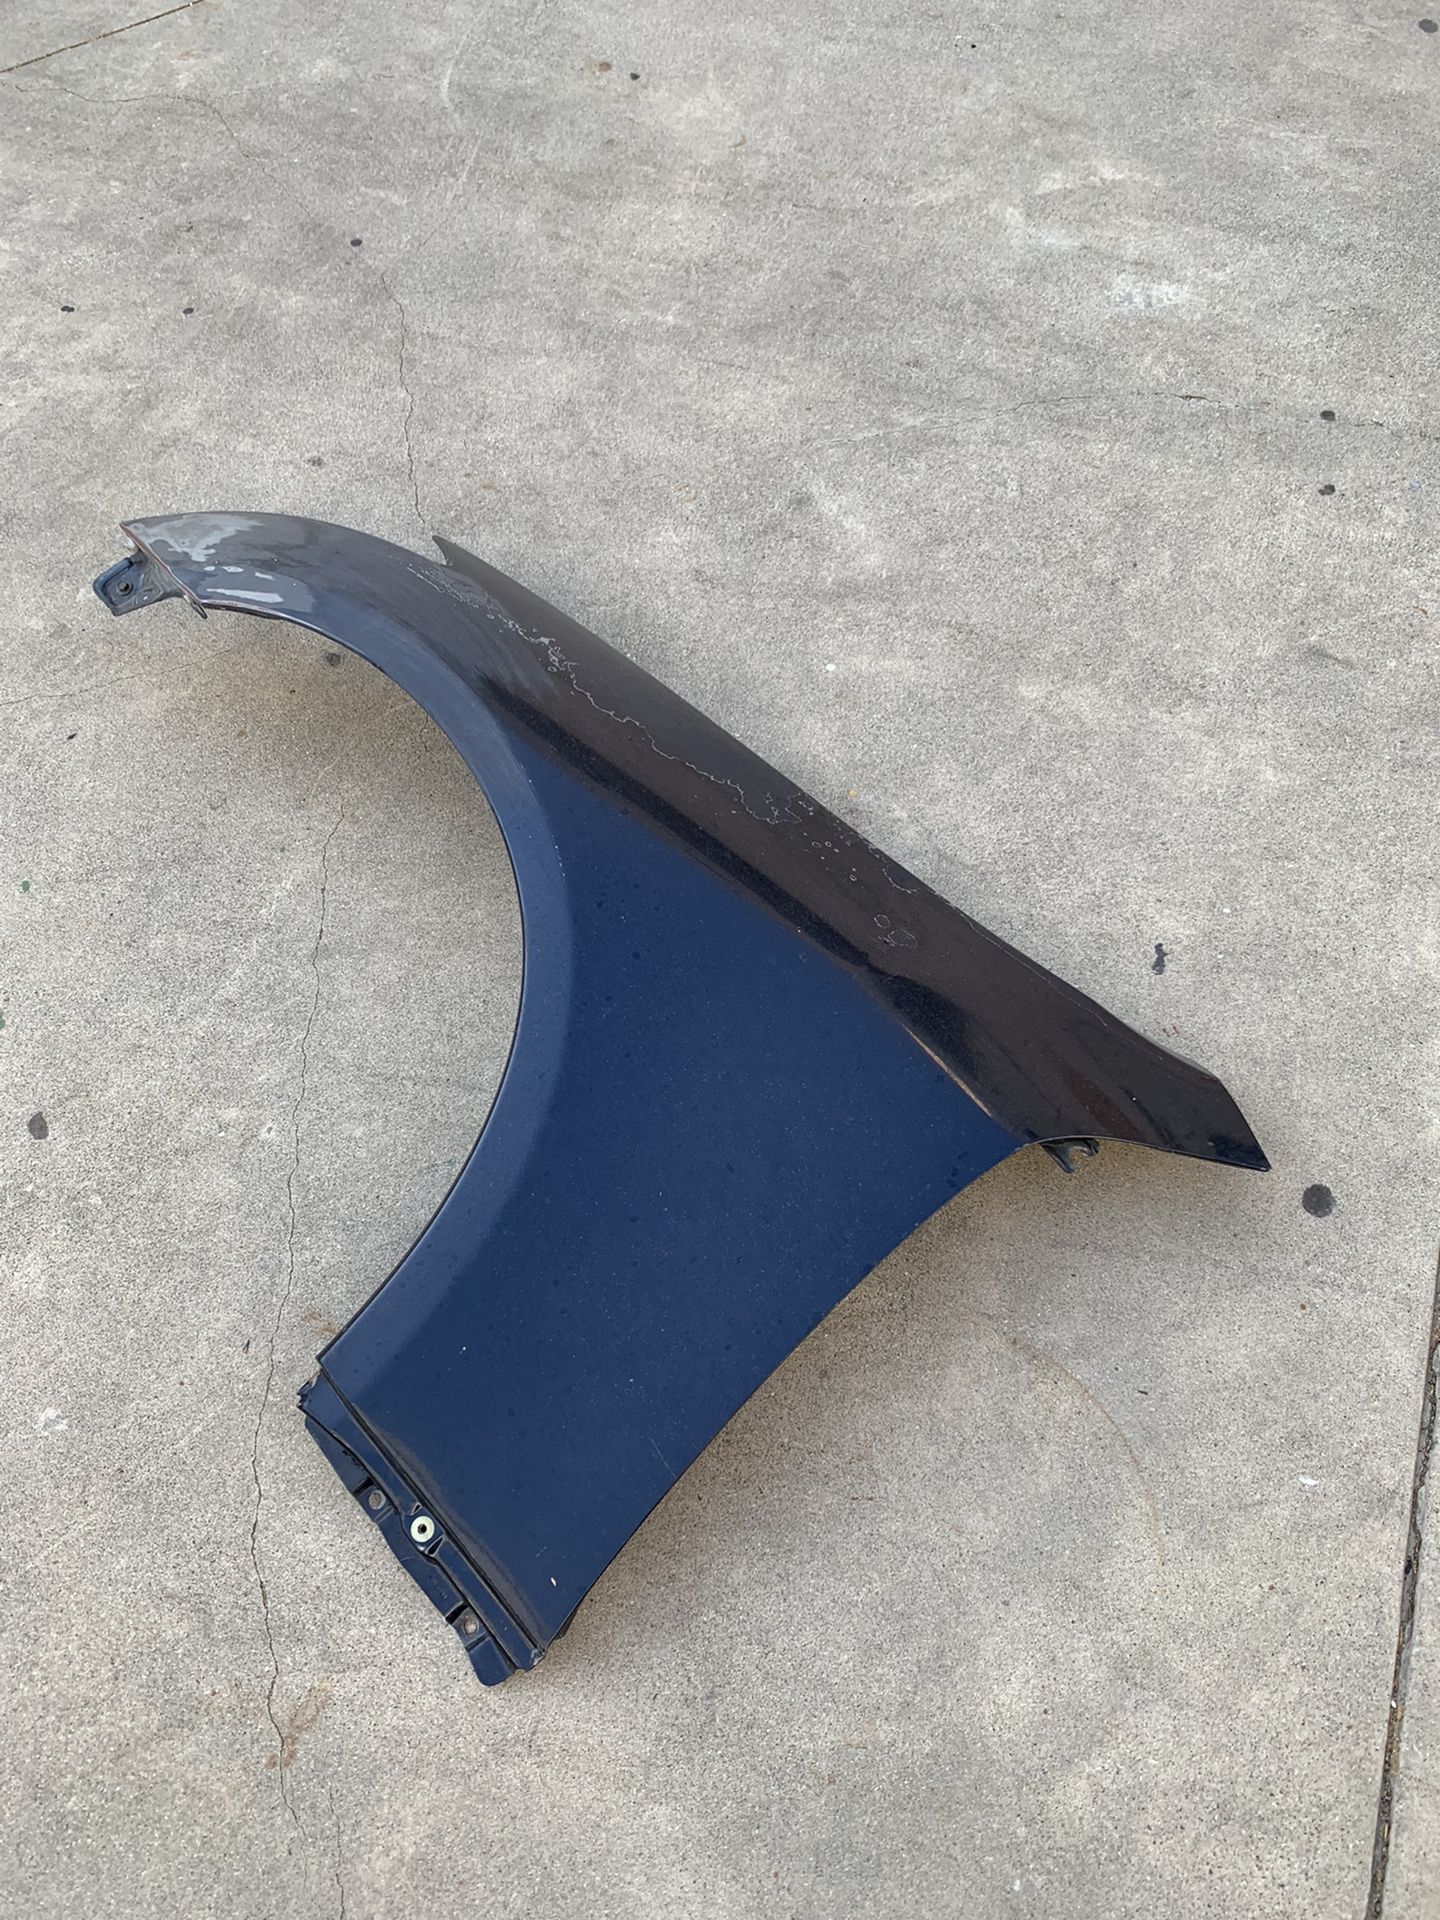 [USED] 03-07 Infiniti G35 Coupe OEM side skirt & fender for sale [$20 for both TODAY ONLY 10/17/21]